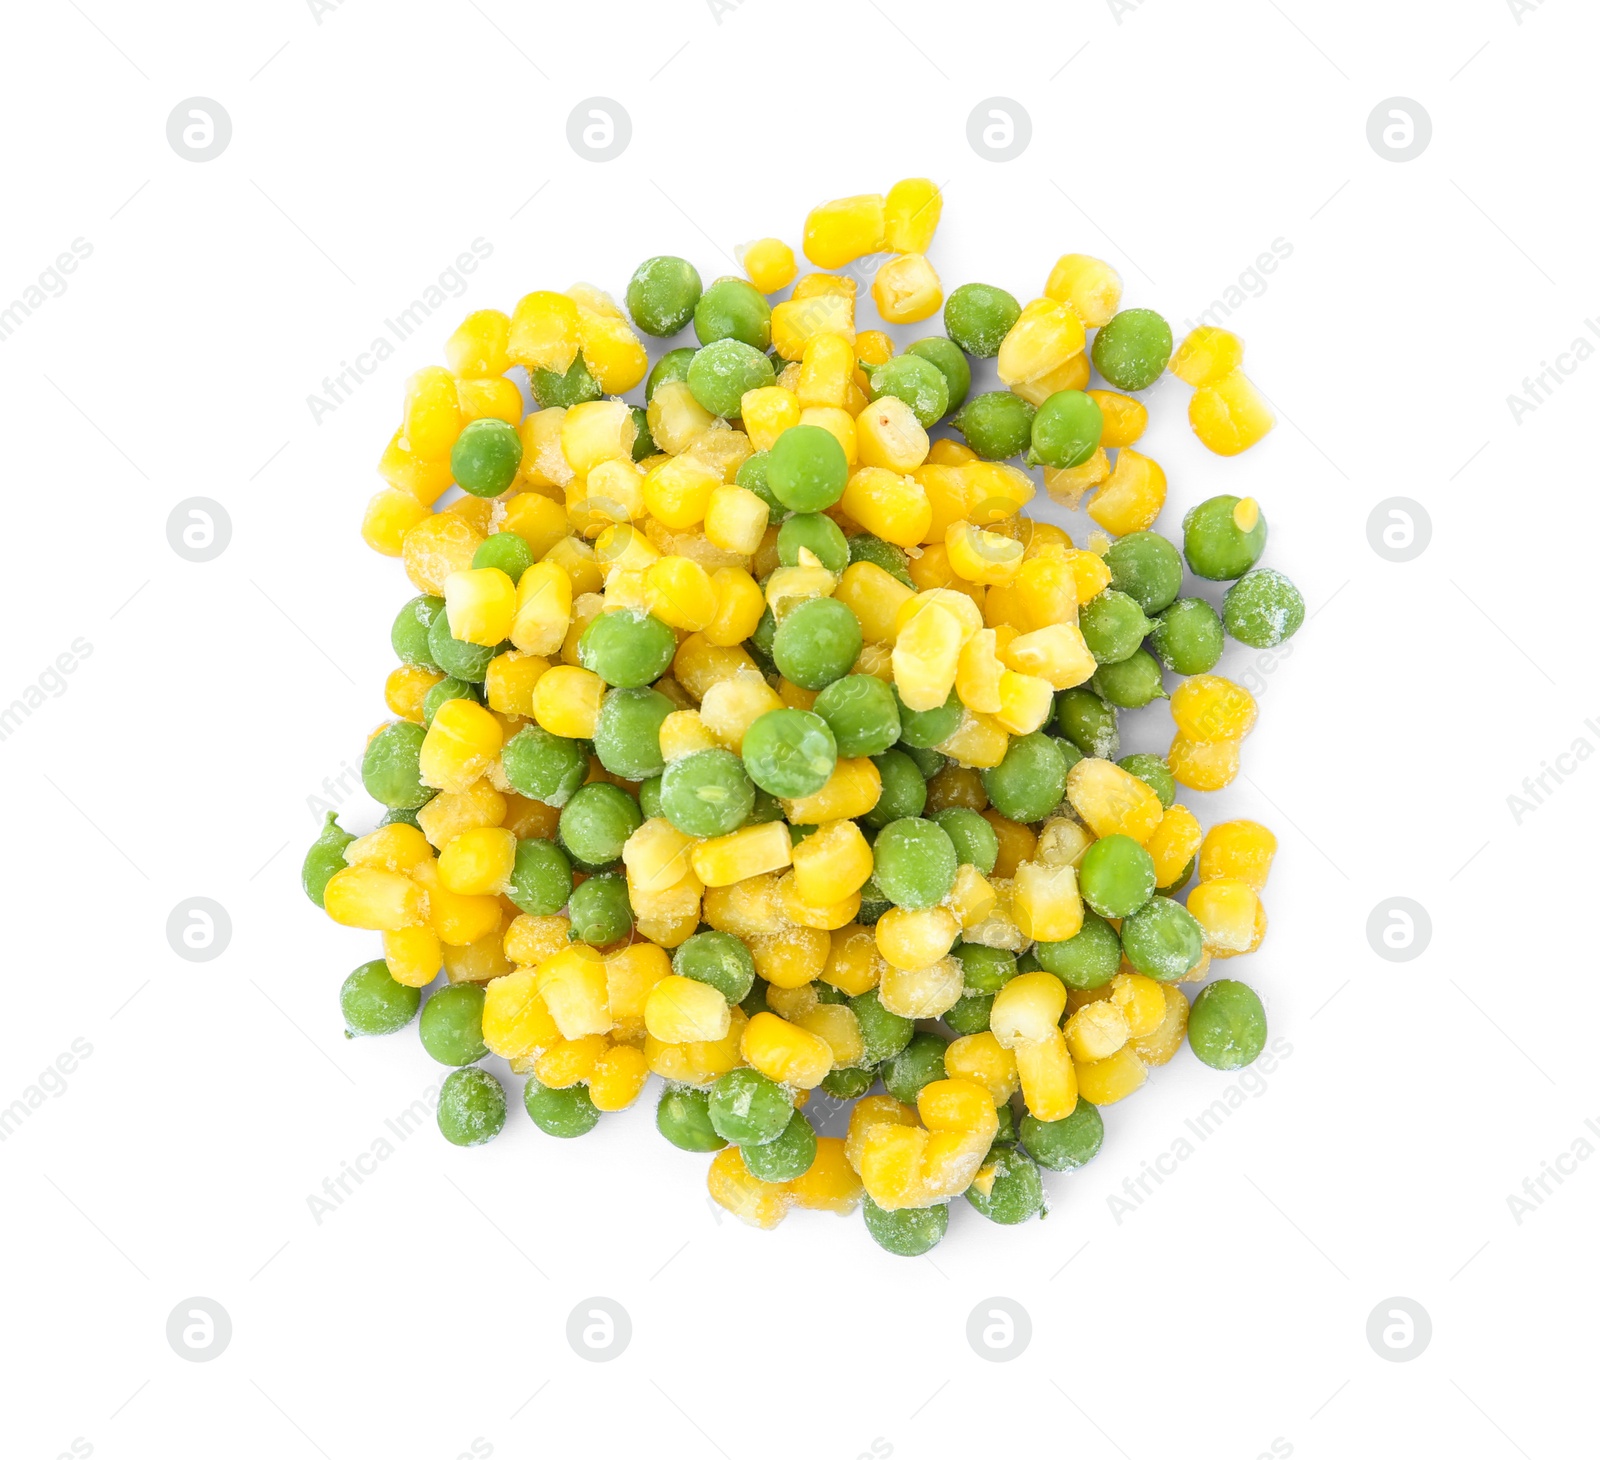 Photo of Frozen corn and peas on white background. Vegetable preservation